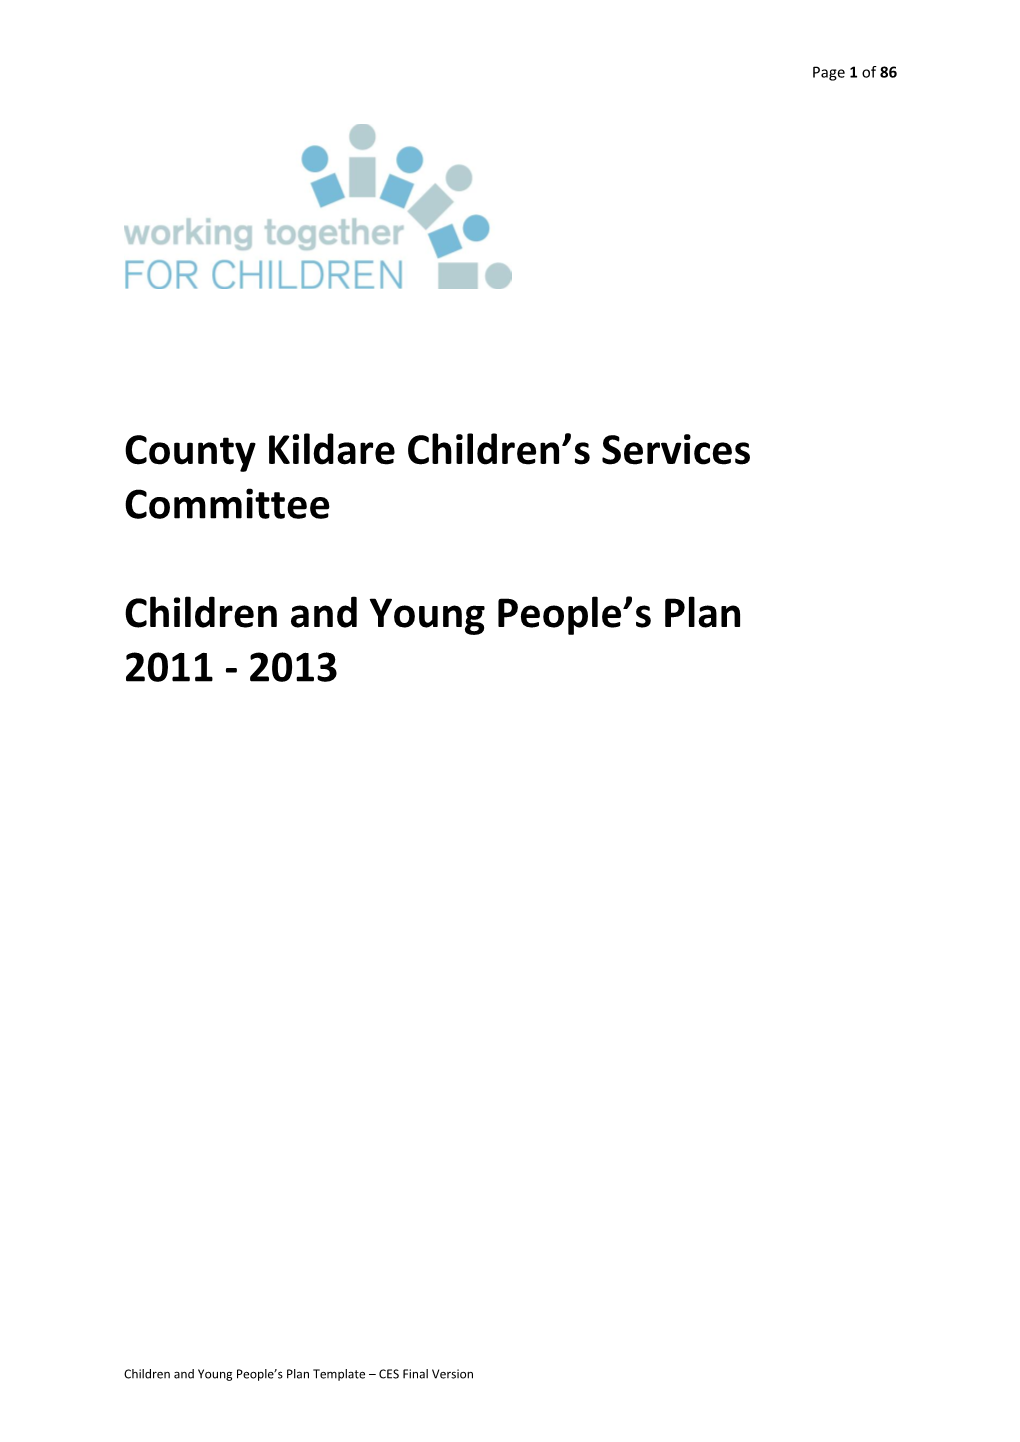 Kildare CSC Children and Young People's Plan 2011-2013